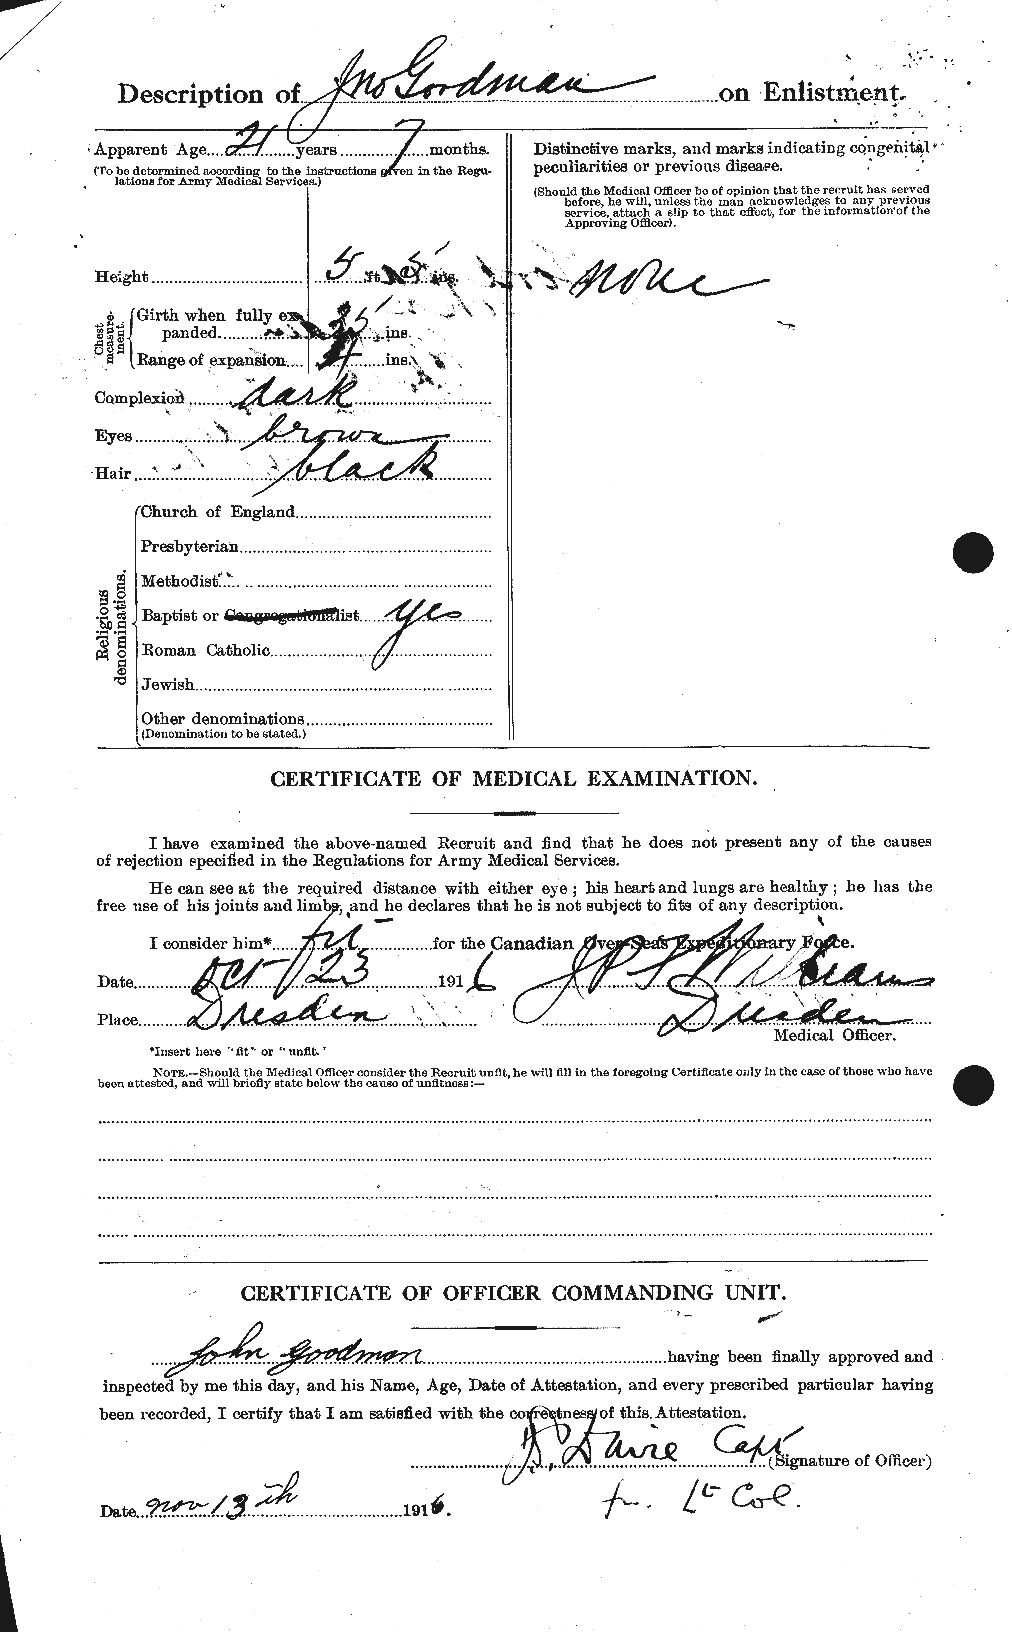 Personnel Records of the First World War - CEF 356175b